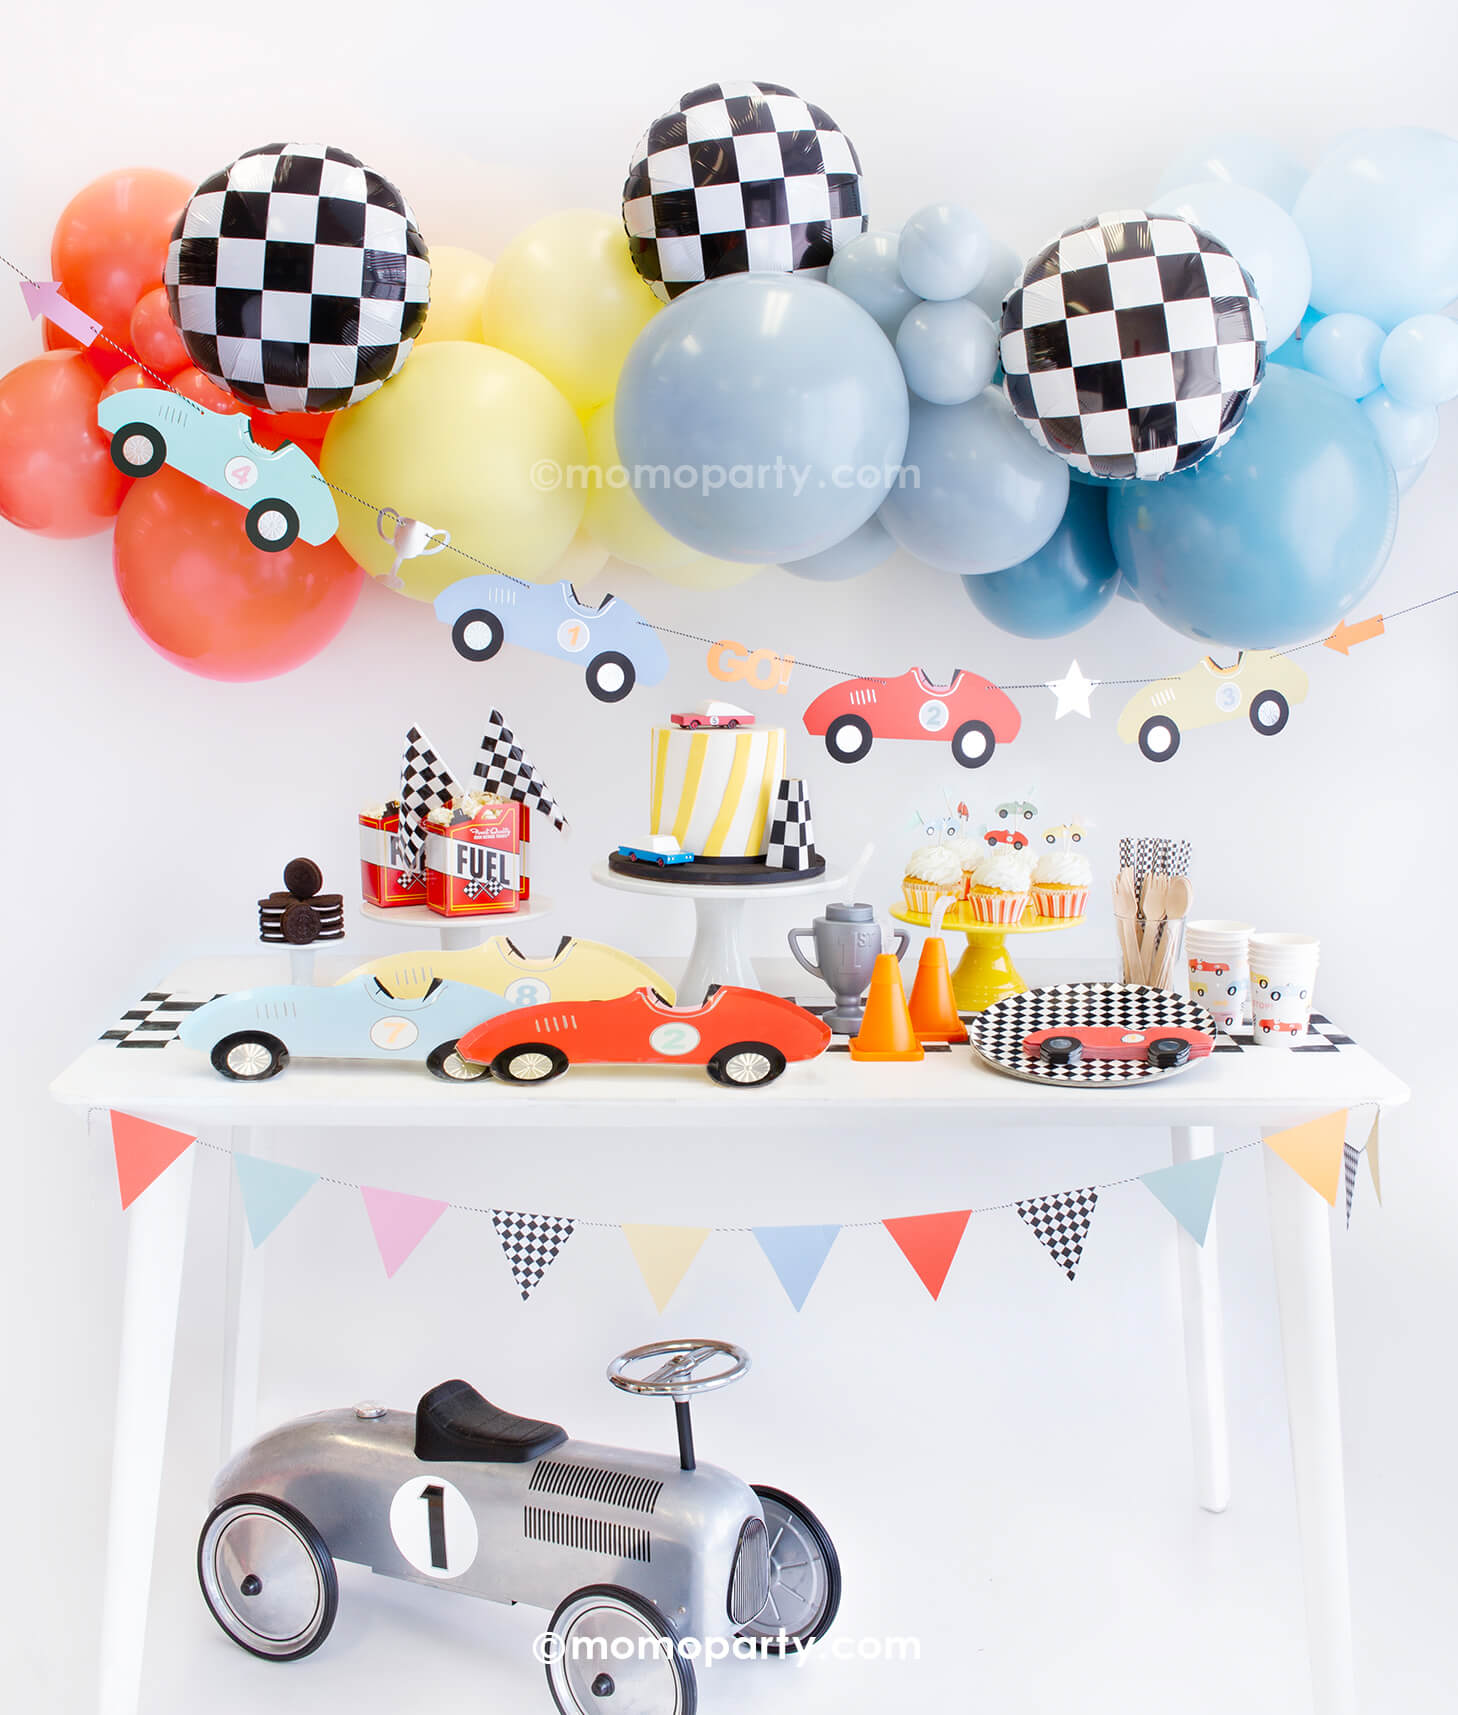 Momo Party Race Car Box, set up inspiration with Meri Meri race car paper plates, race car shape napkins, race car graphic party paper cups, checkered round side plates, neon confetti flag cupcake kit, candy car as cake topper, Fuel treat favor box with popcorns as tableware, colorful balloon cloud, race car party garland with party pennants in pastel colors, checkerboard foil balloon as decorations for modern Race car, car themed "Two Fast" second birthday party or a "Fast One" first birthday party.